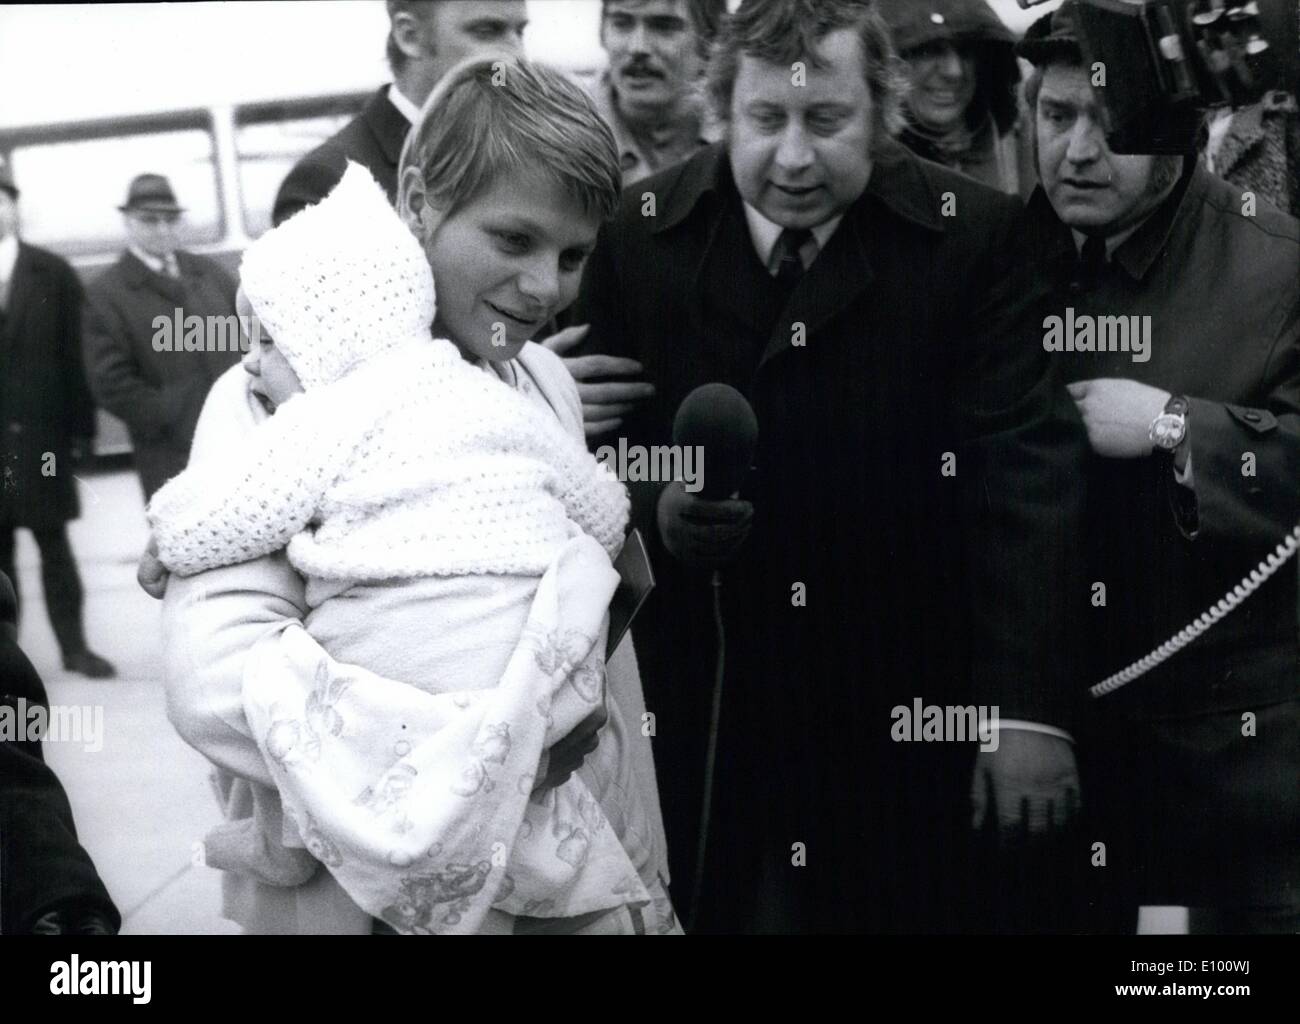 Feb. 02, 1972 - 50 Freed Jumbo Passengers Landed in Munich Very tired and still a bit frightened 37 women and 12 children and one man who were passengers on a Jumbo Jet which was hijacked 30 hours earlier on a flight to Aden, climbed out of a Boeing 727 at Munich Airport. The special plane with the freed men arrived in Frankfurt the same evening. Ops: Even the youngest passenger who is surrounded by reporters is back in safety. Stock Photo